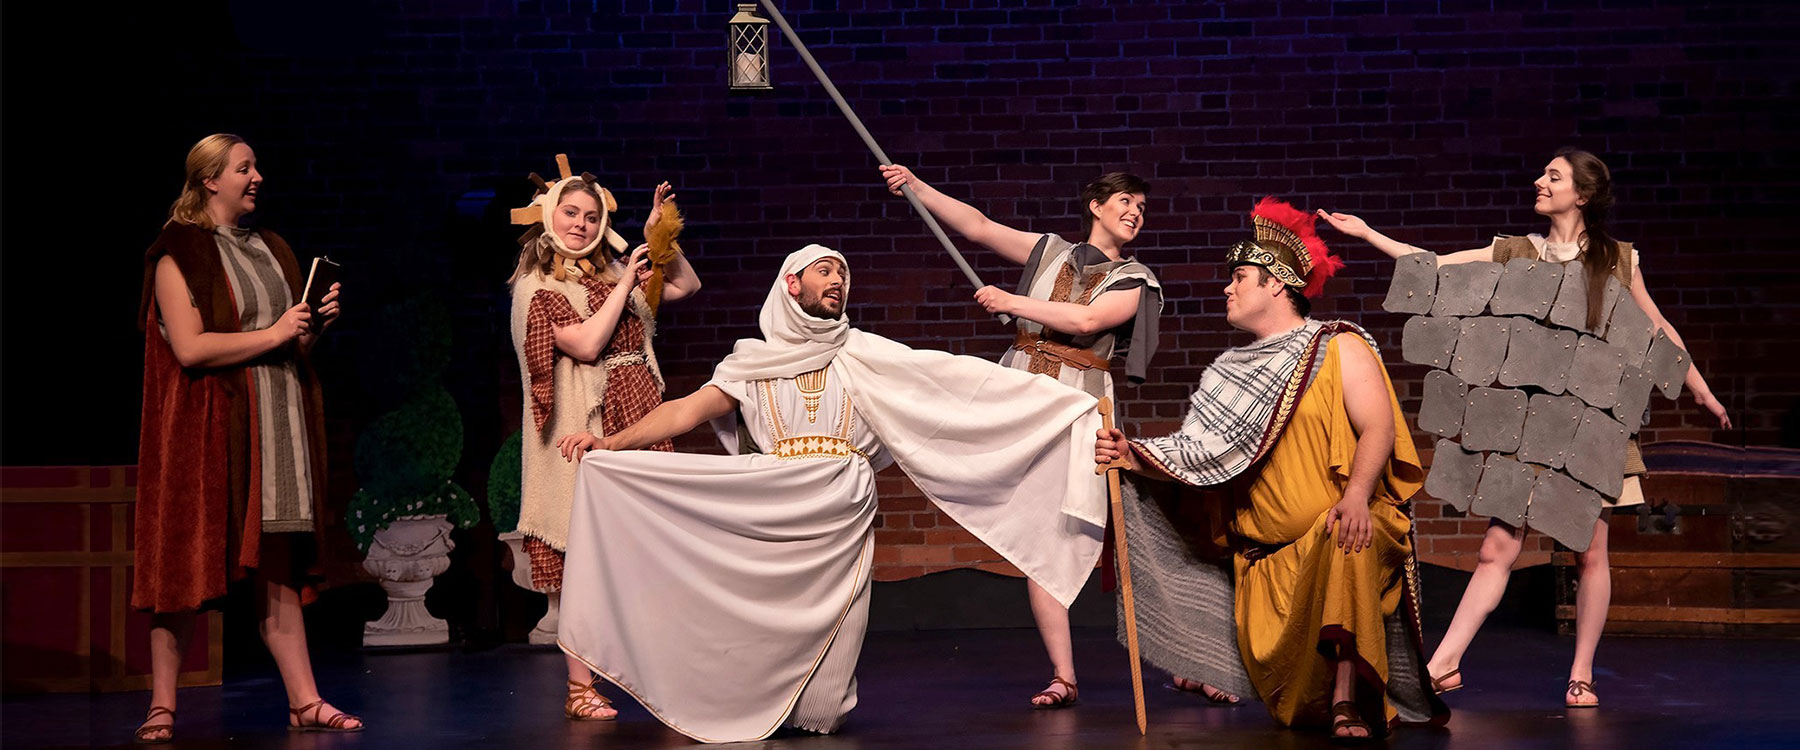 A lively theater scene with actors in medieval costumes performing on stage against a brick backdrop.